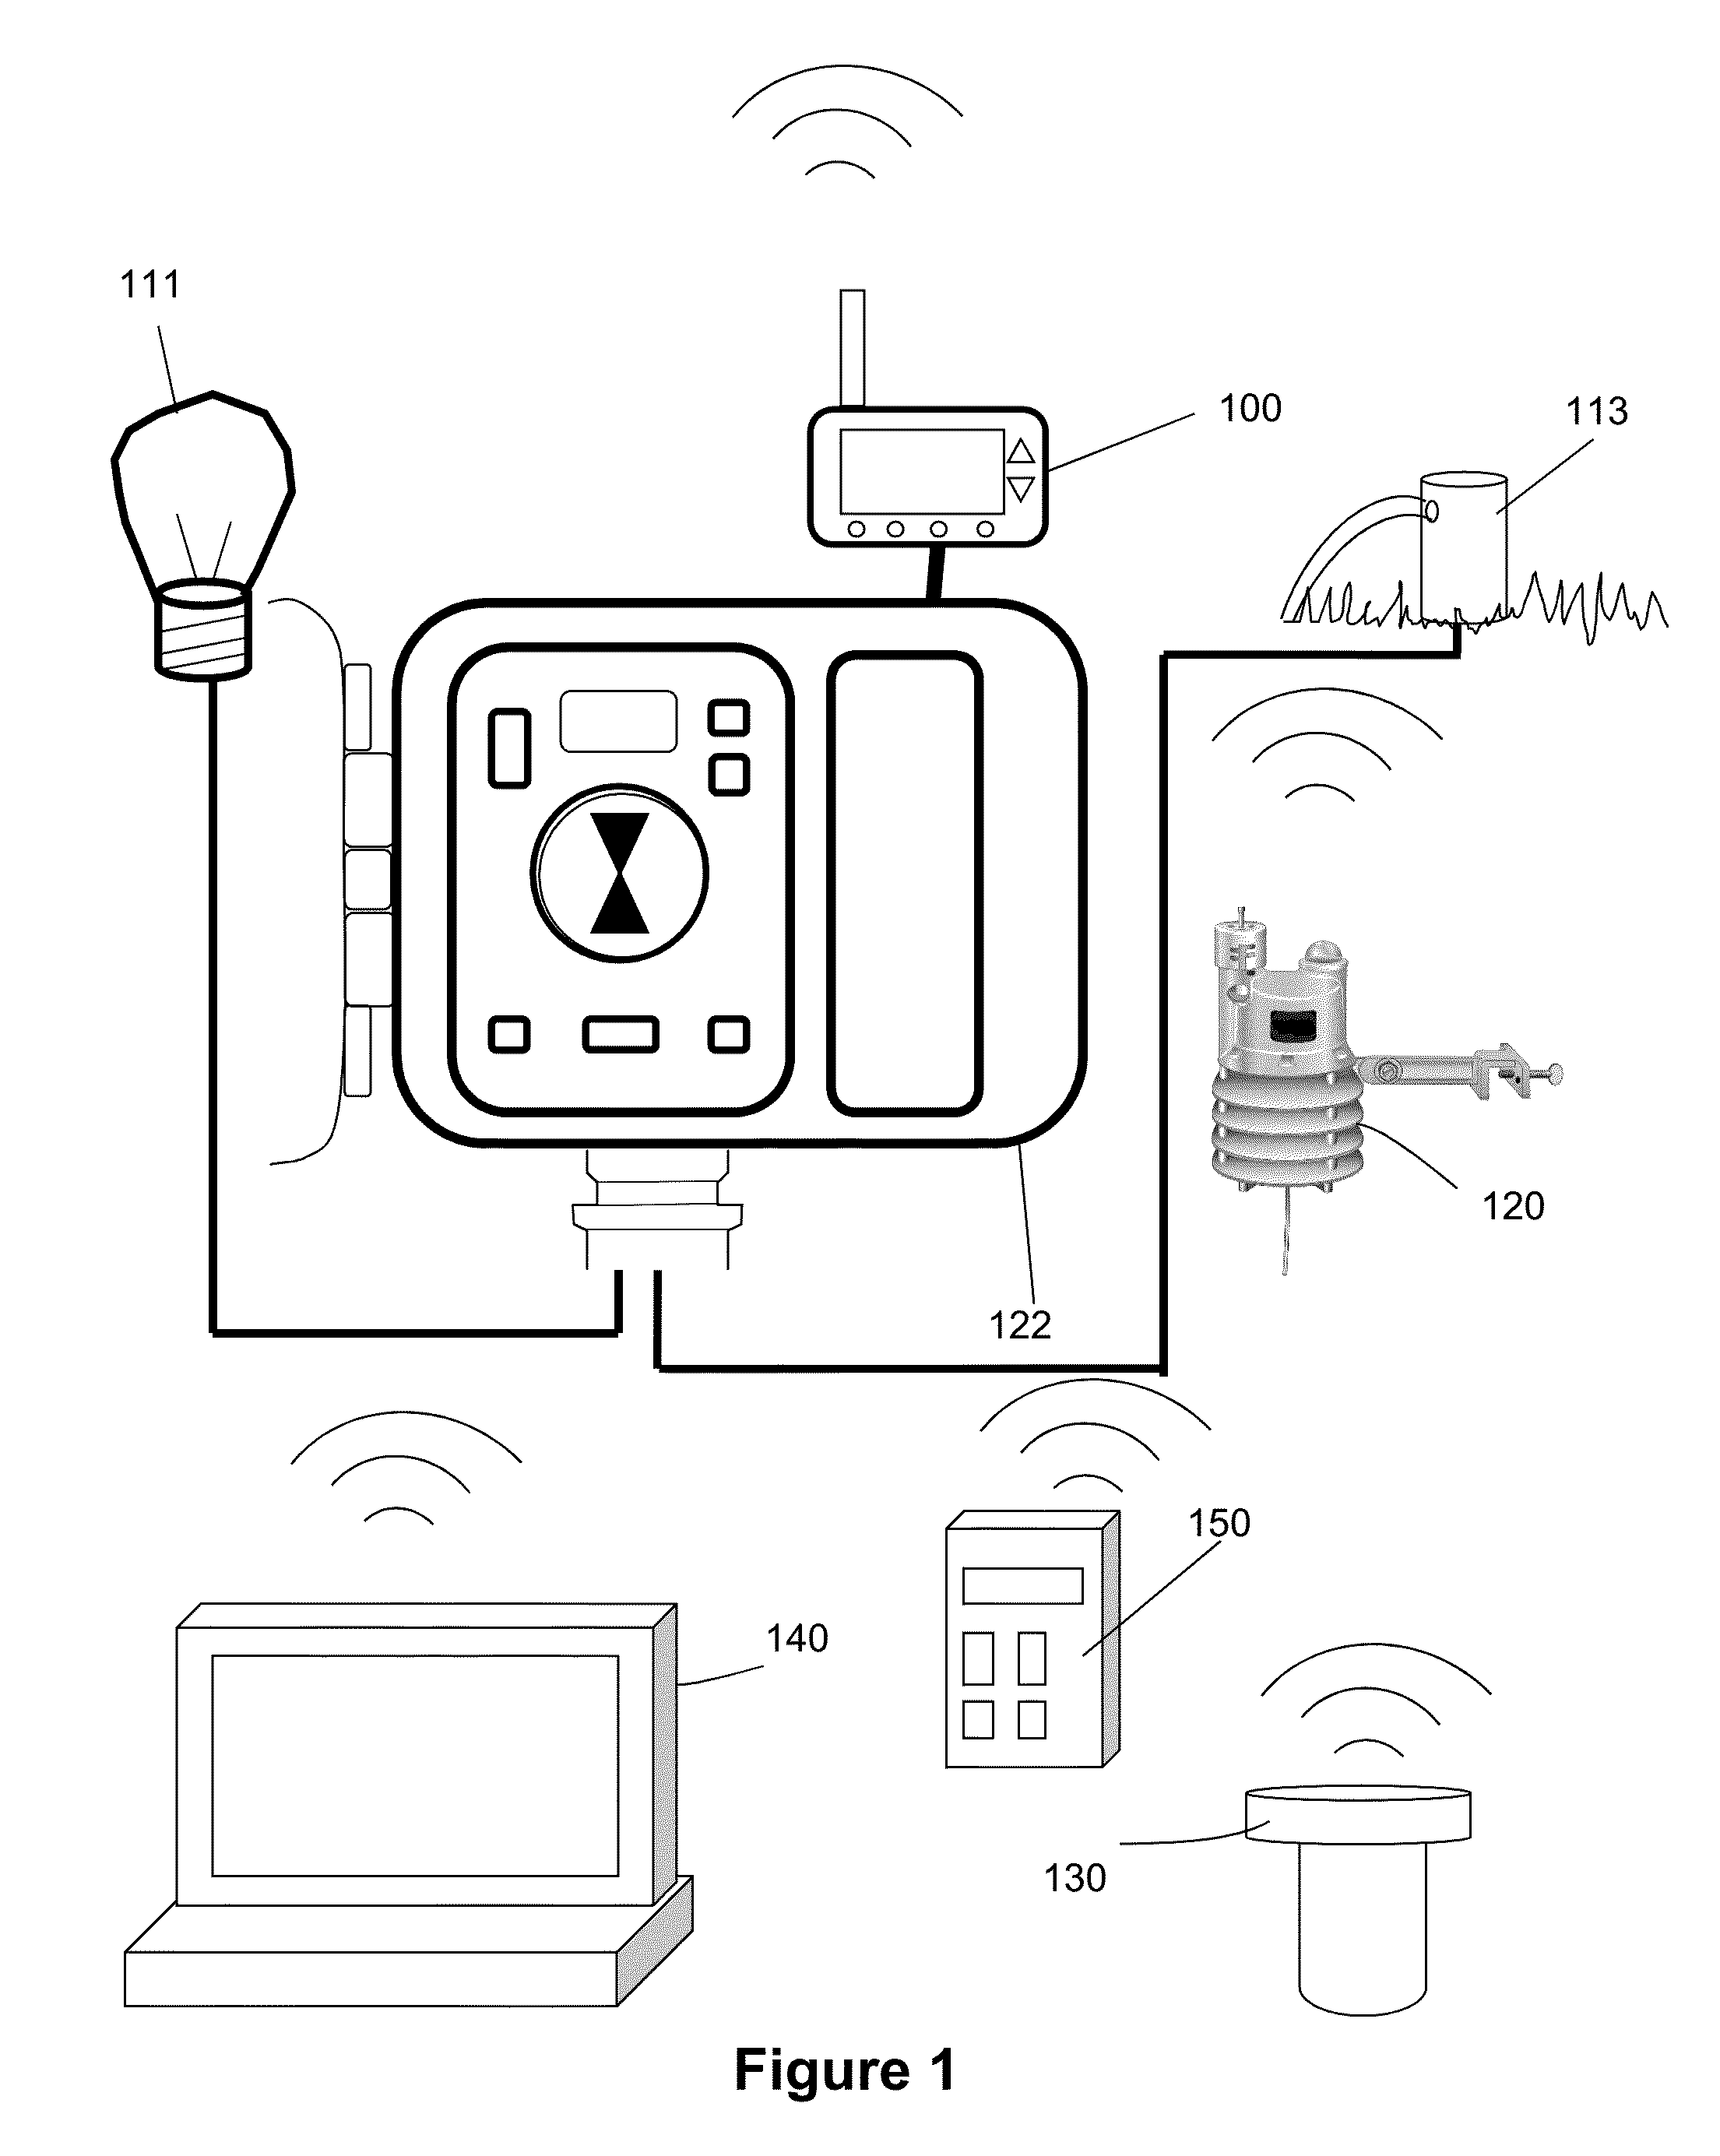 Irrigation controller with weather station